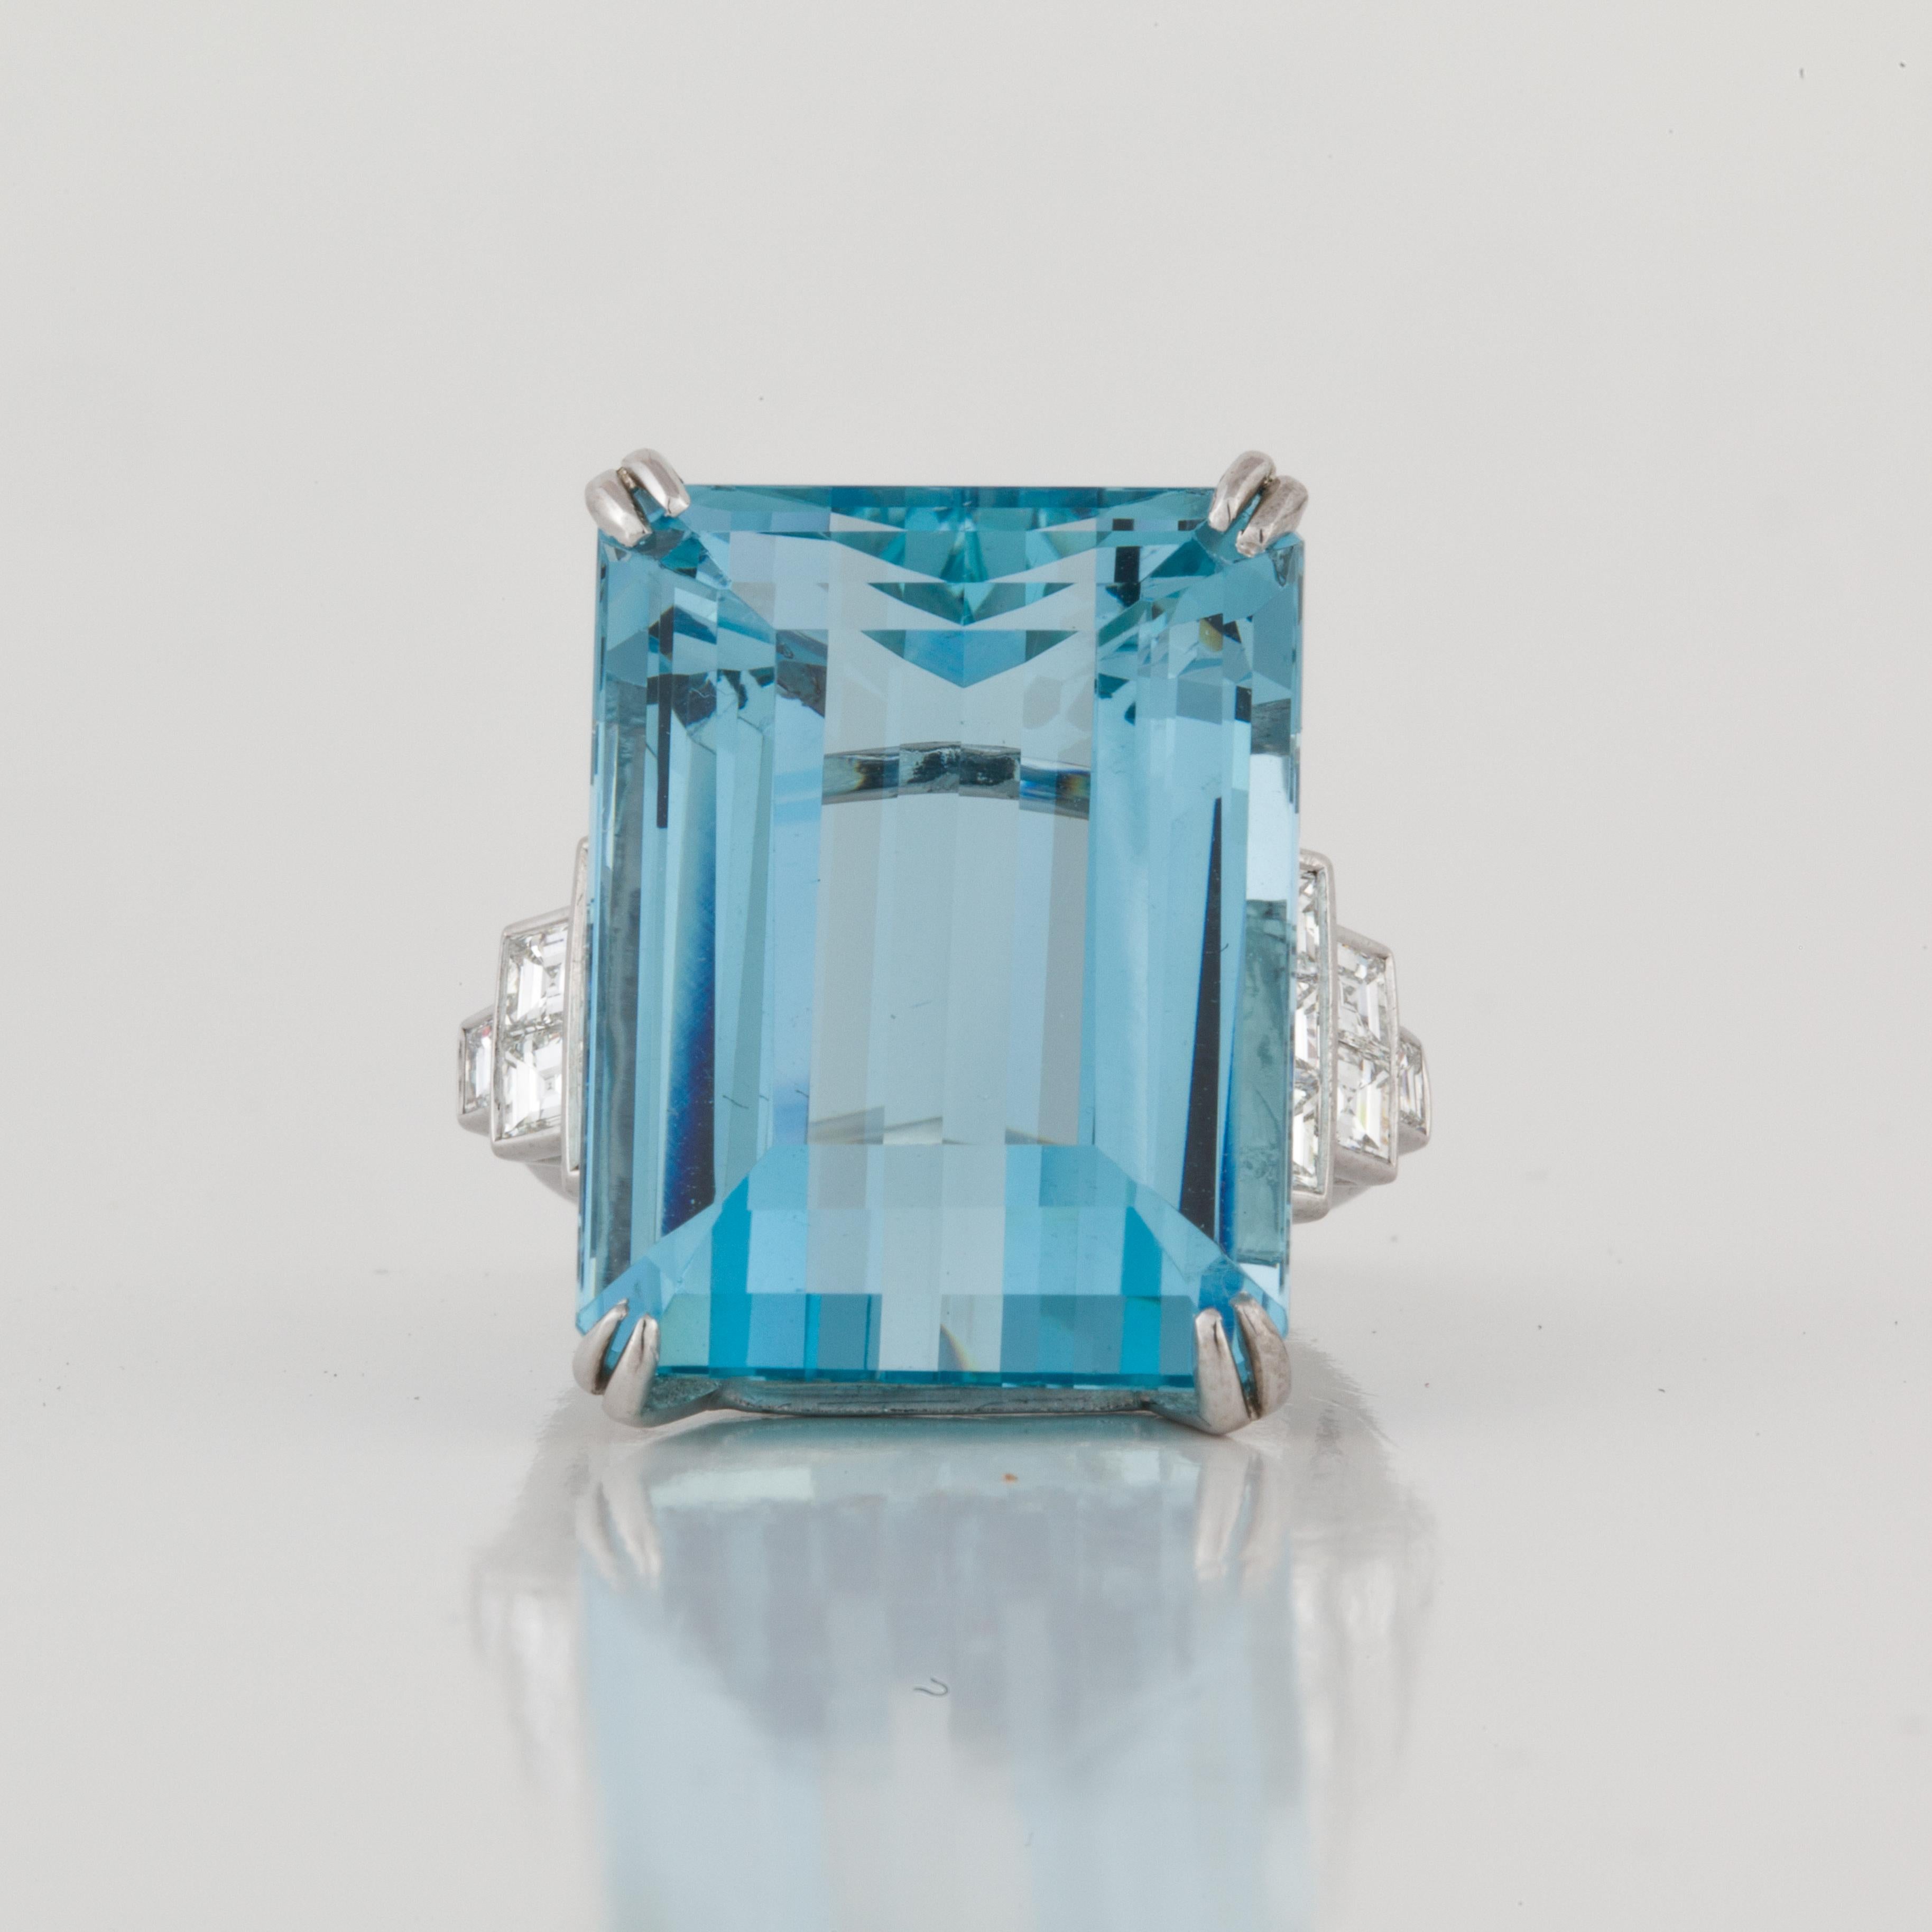 This cocktail ring features an emerald-cut aquamarine accented by step cut diamonds, set in platinum.  The ring is marked 